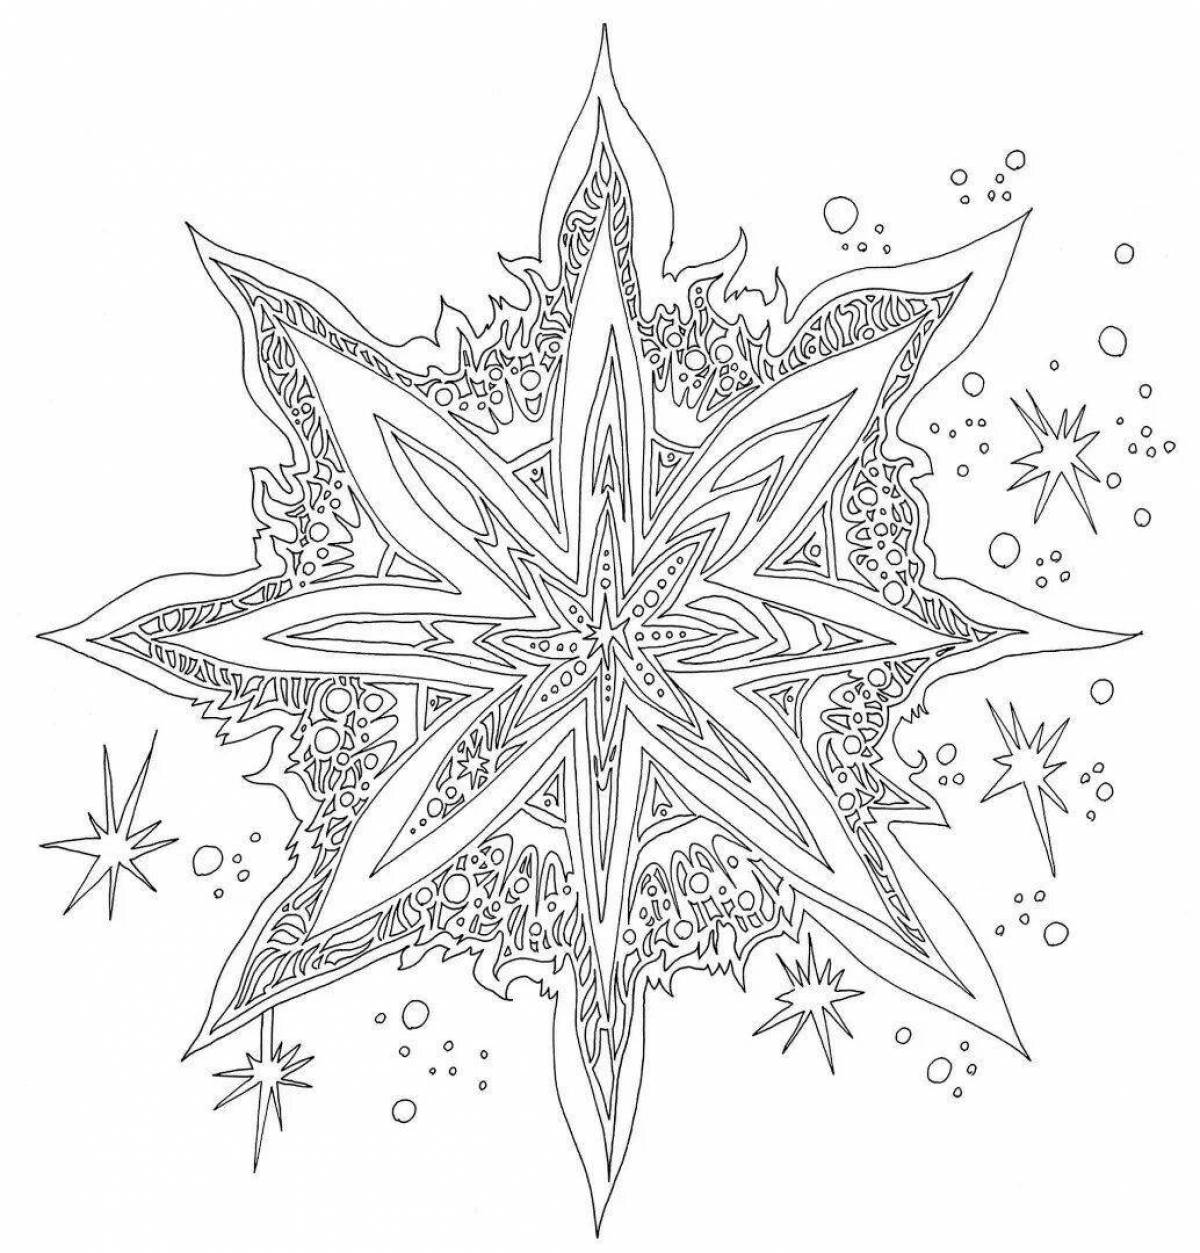 Exquisite Christmas star coloring book for kids